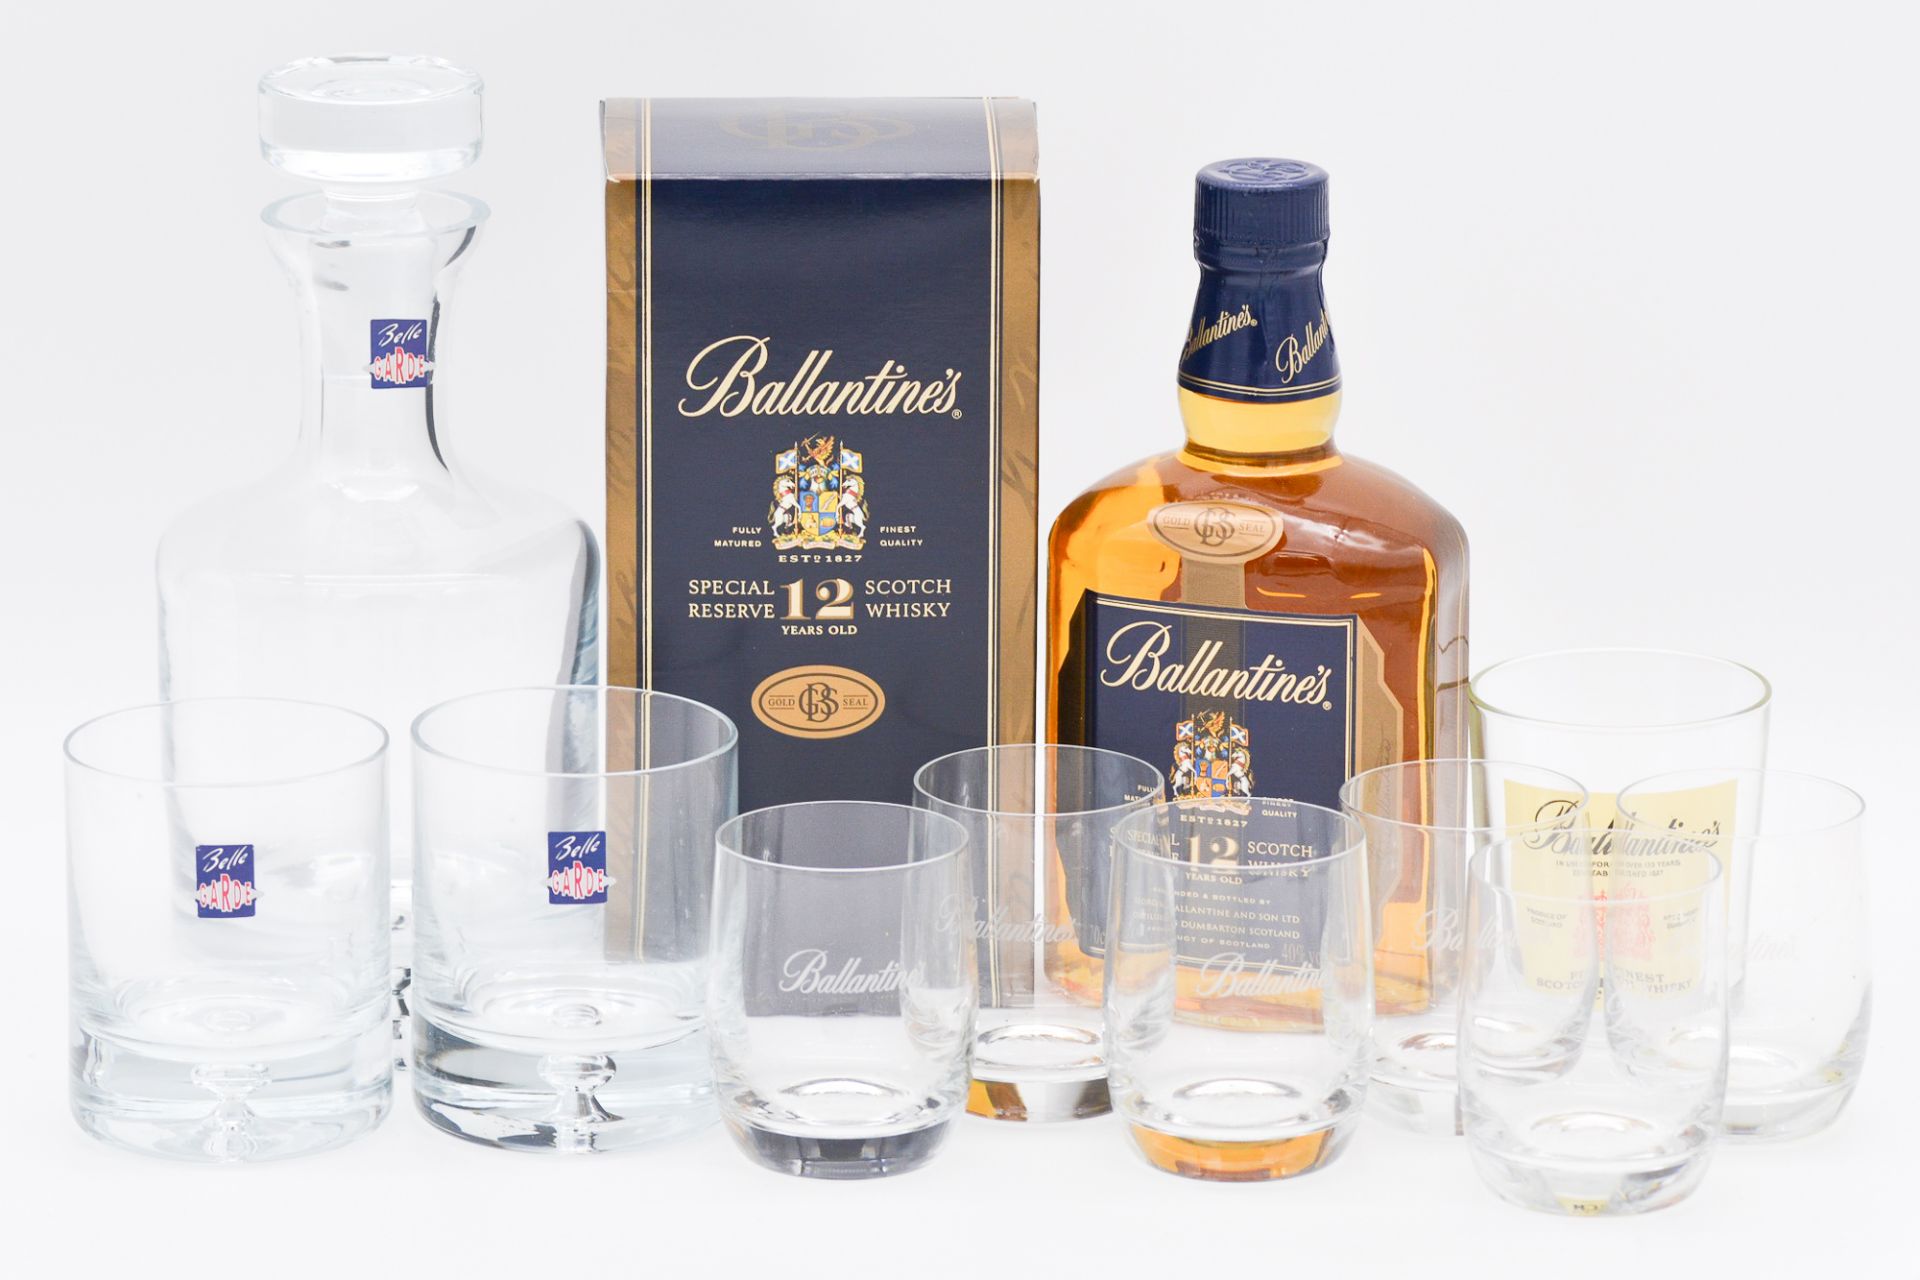 Ballantine's Special Reserve, 12 year old, presentation set with glass decanter